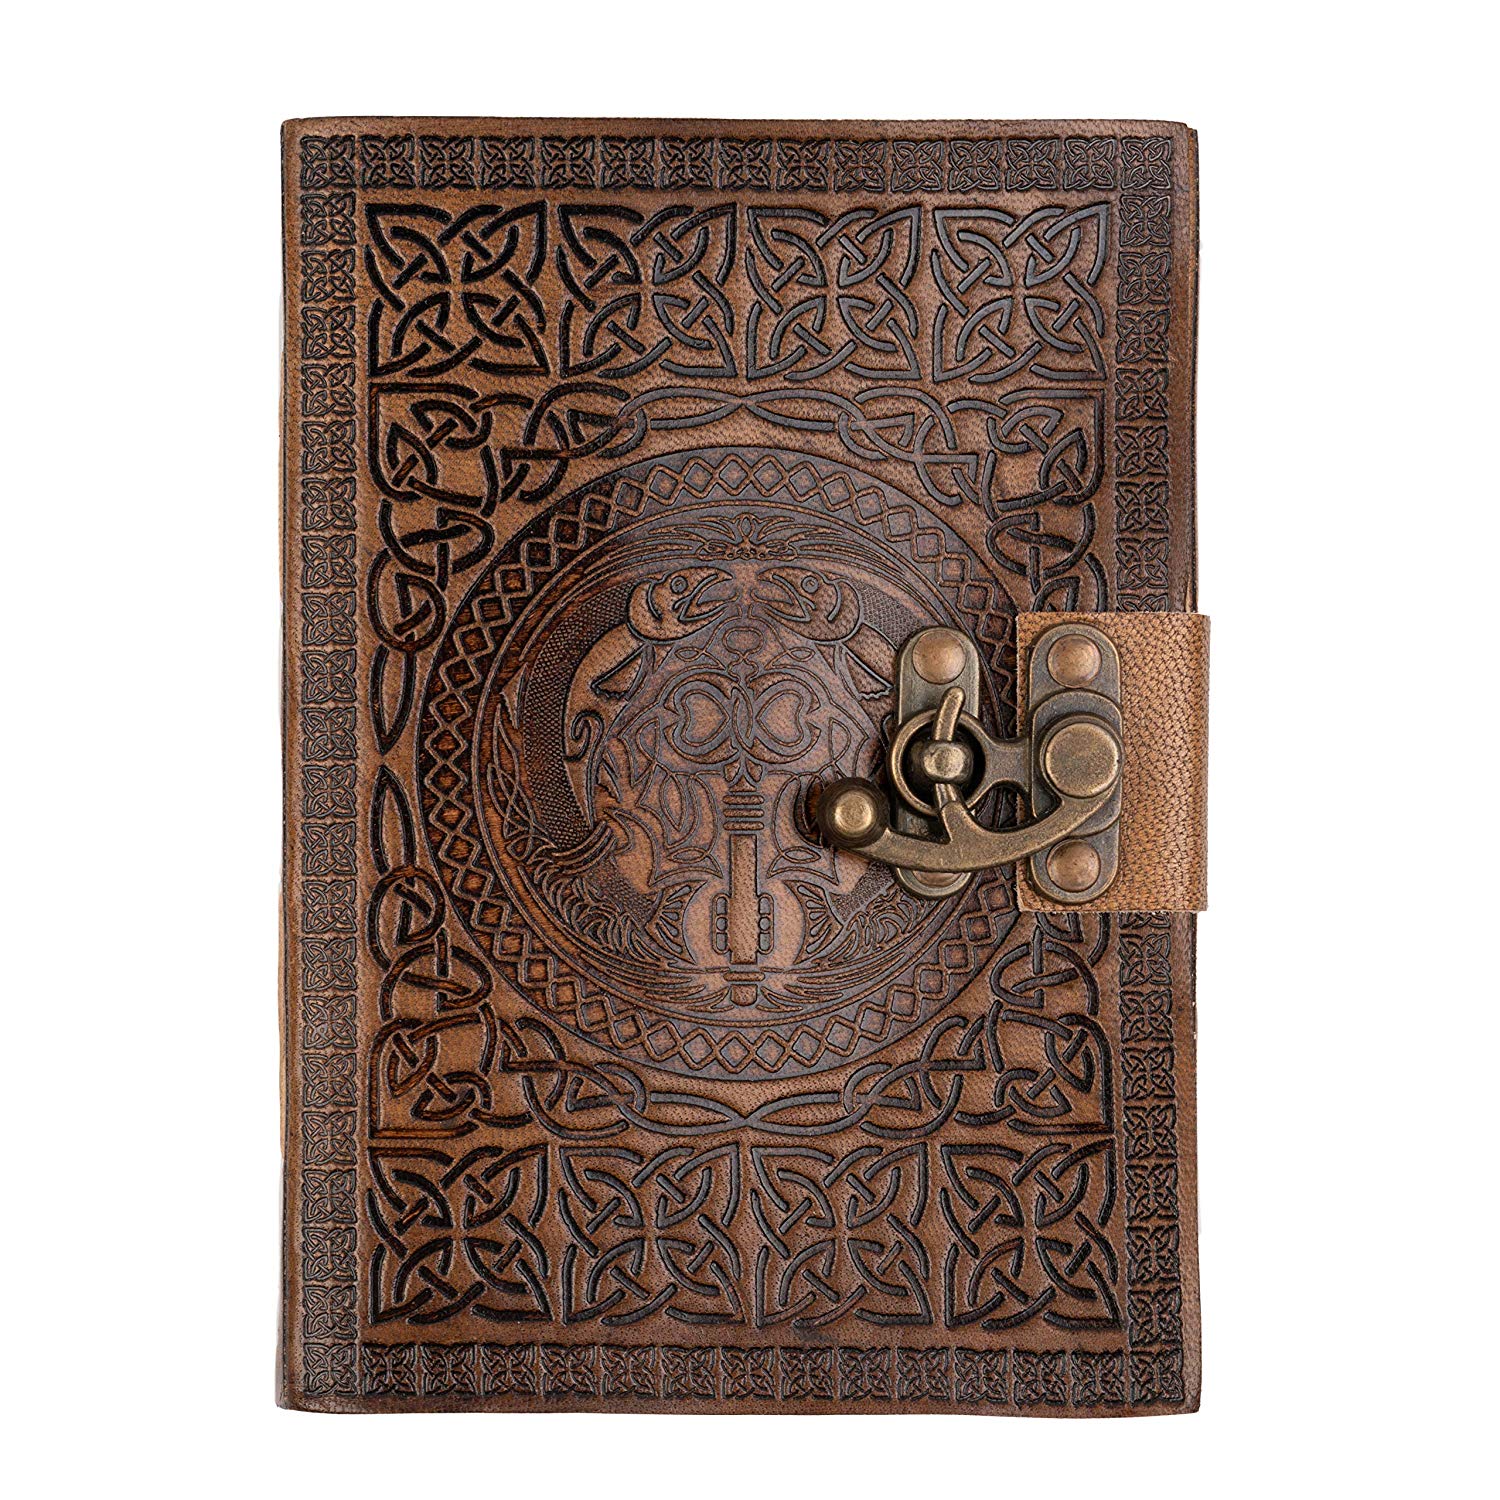 DreamKeeper Ciannait. A5 handmade leather journal with superbly handcrafted Celtic design. 18x13cm